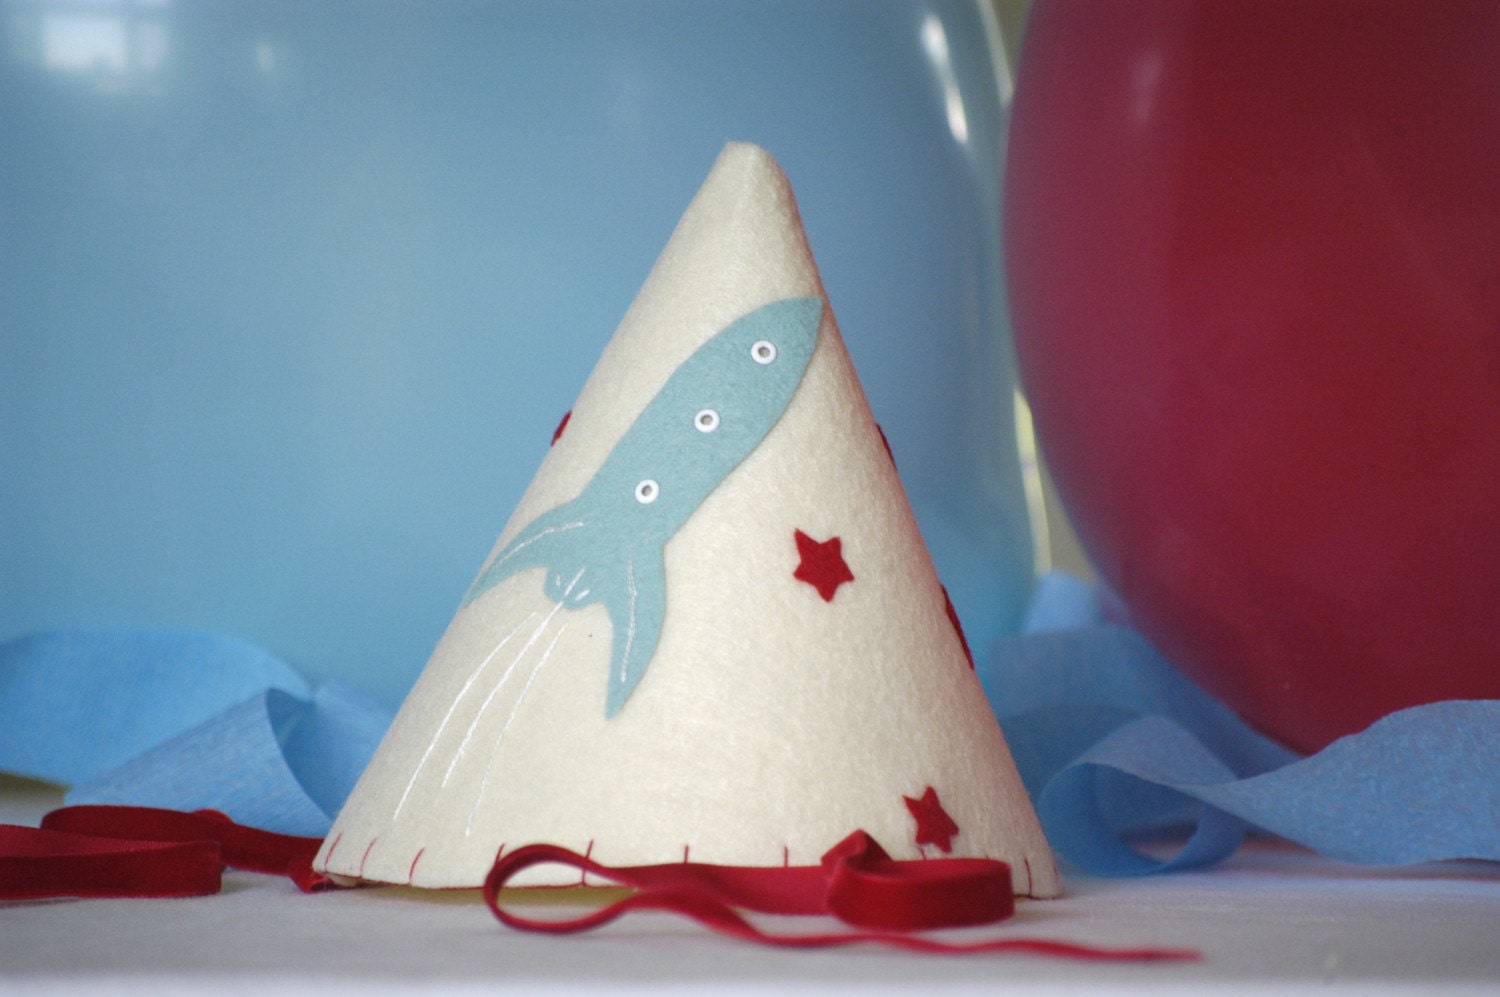 party hat icon. offered to give away one party hat or crown to a lucky AFOMFT reader!